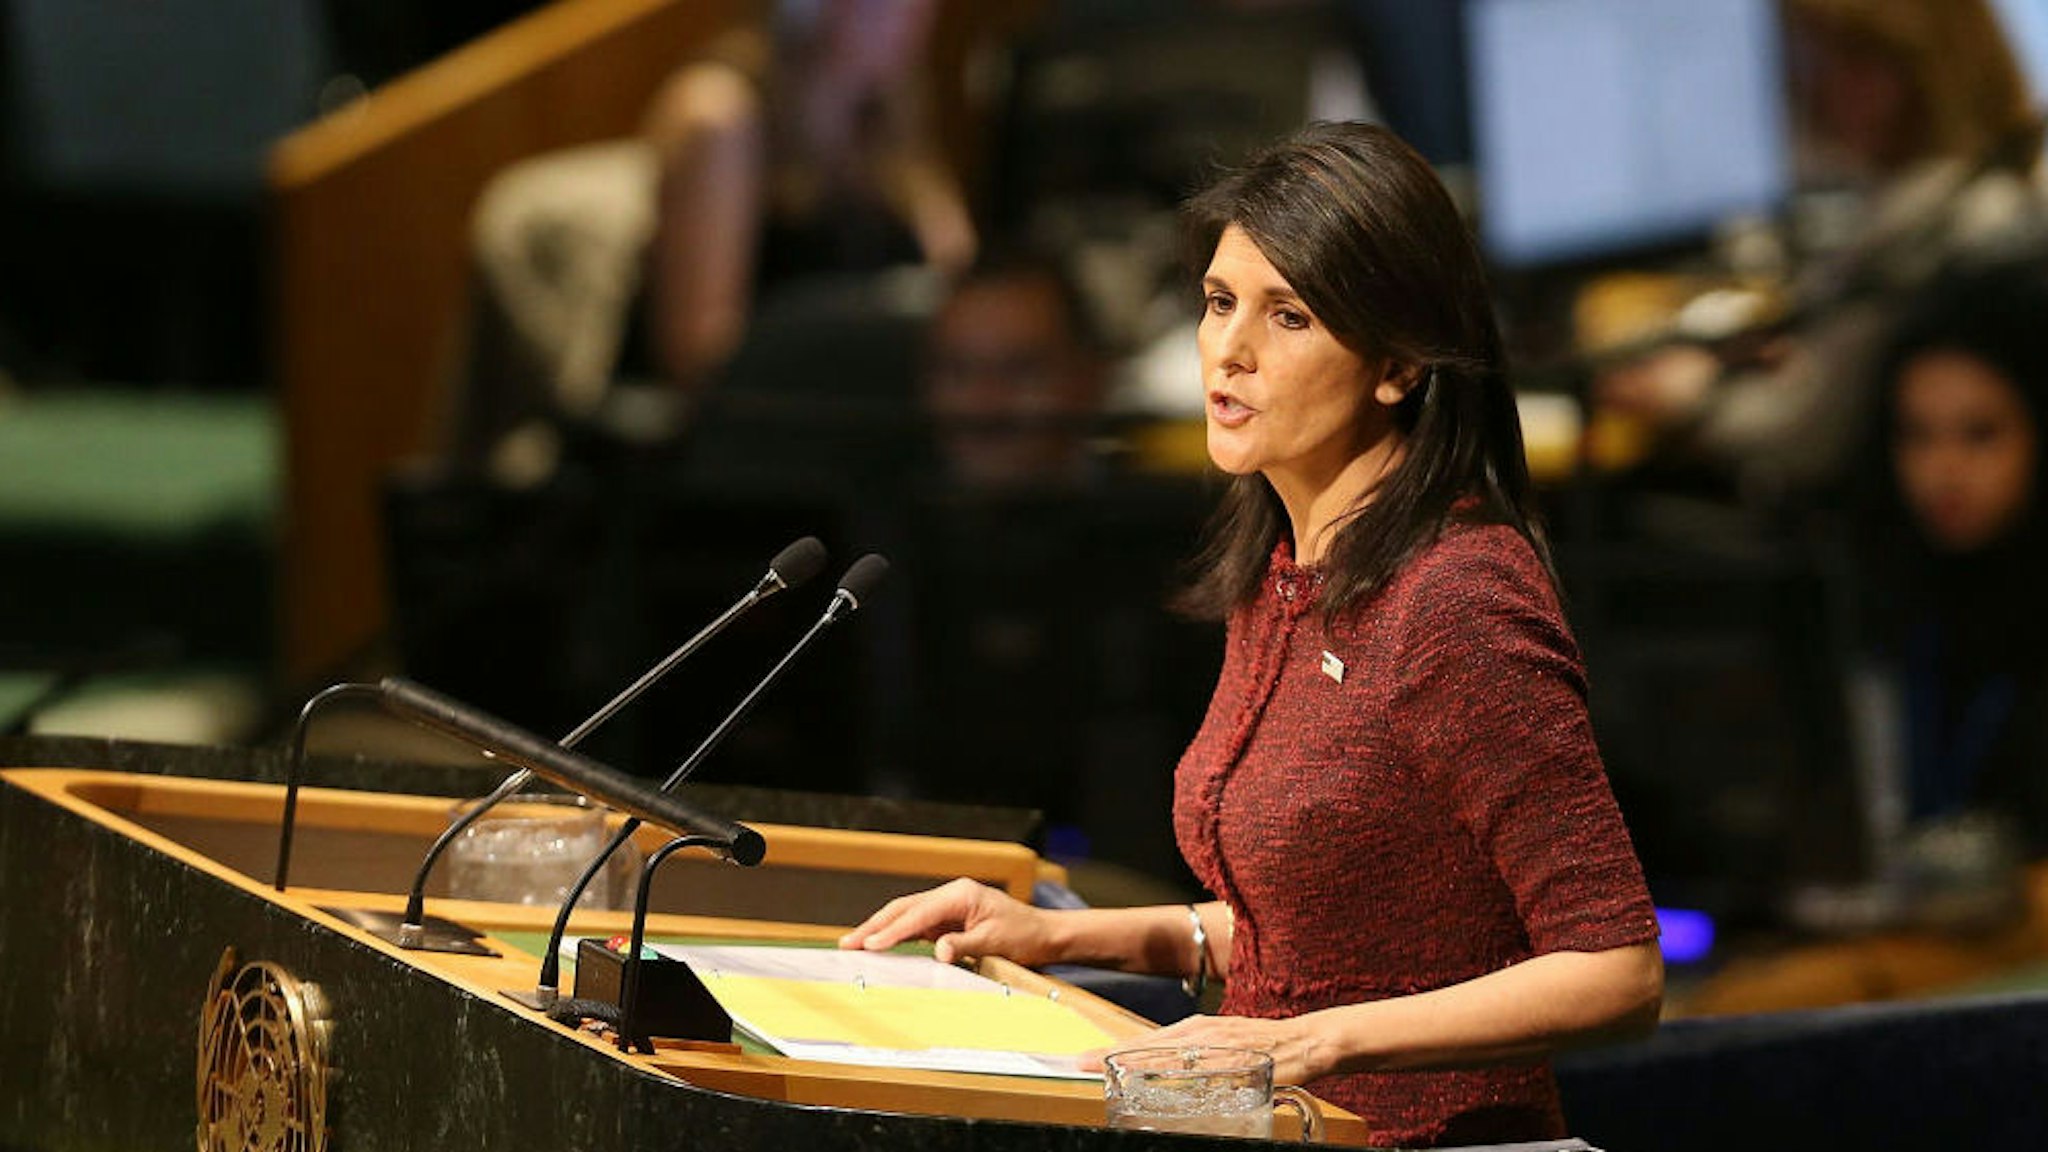 Nikki Haley, United States Ambassador to the United Nations, speaks on the floor of the General Assembly on December 21, 2017 in New York City. A vote is scheduled at the United Nations General Assembly today concerning Washington's decision to recognize Jerusalem as Israel's capital and relocate its embassy there. The US, which alone vetoed a resolution put to the Security Council on the move to Jerusalem, cannot veto General Assembly motions, which require a simple majority to be adopted. The Trump administration has threatened to take action against any country that votes against the United States decision to move its embassy. (Photo by Spencer Platt/Getty Images)